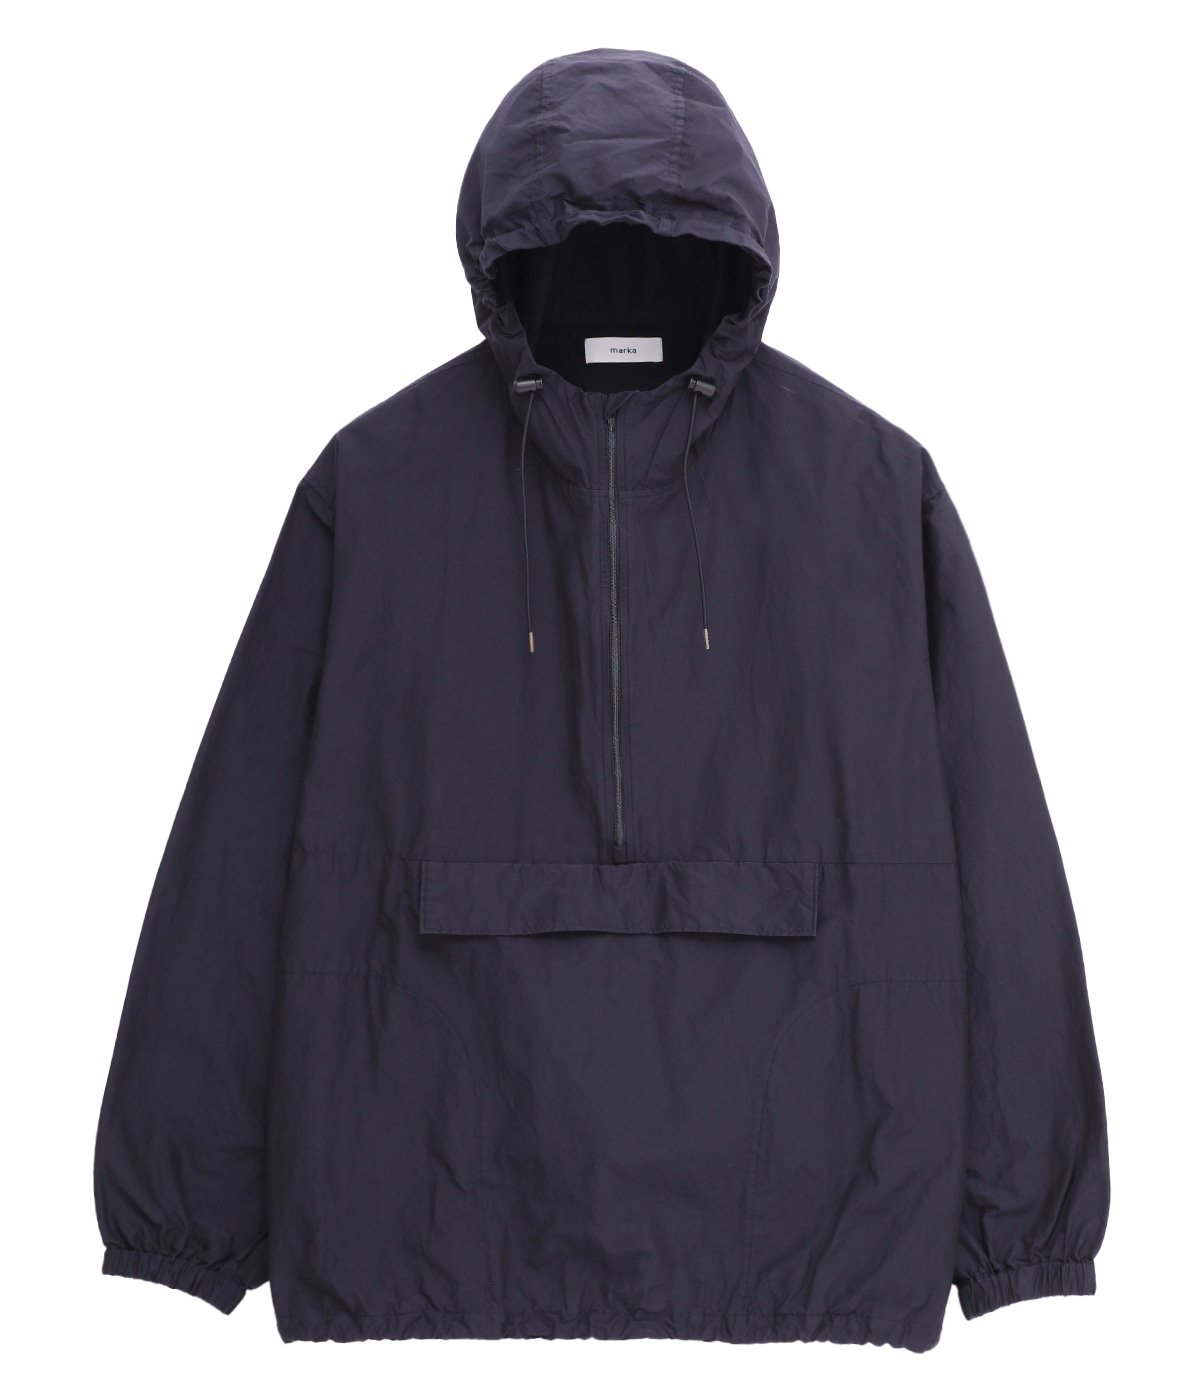 ONLY ARK】別注 ANORAK PARKA - organic cotton×silk high count ...